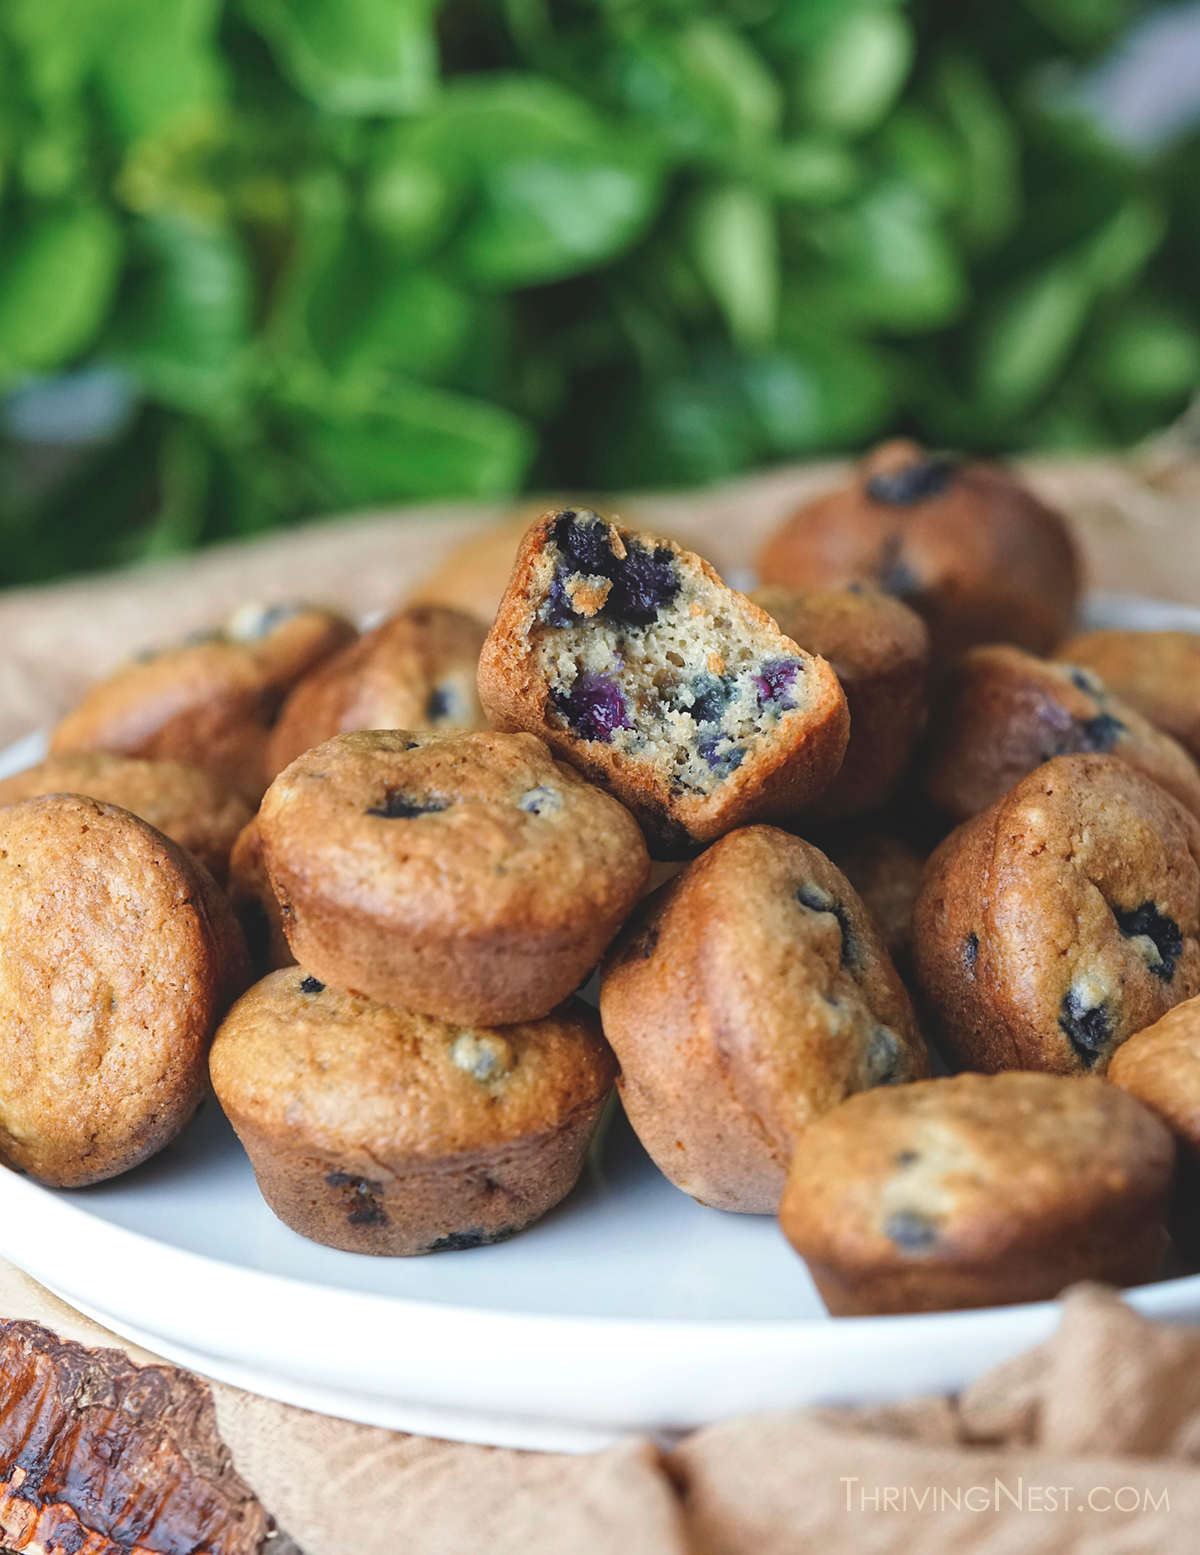 Blueberry muffins for baby, toddlers and kids gluten free and dairy free option.